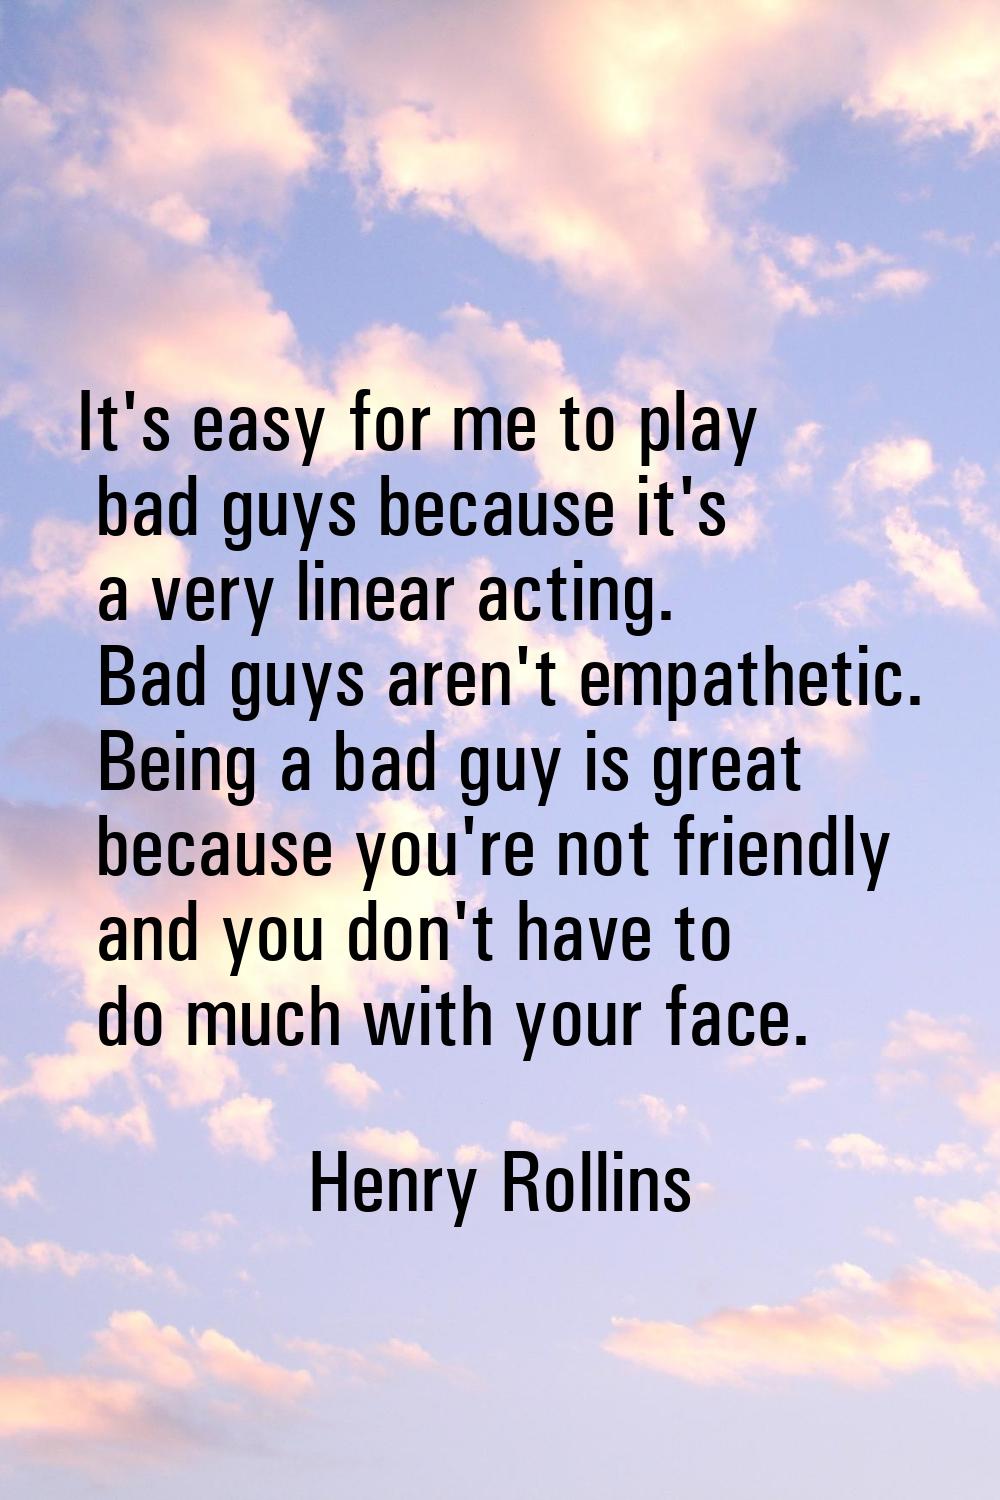 It's easy for me to play bad guys because it's a very linear acting. Bad guys aren't empathetic. Be